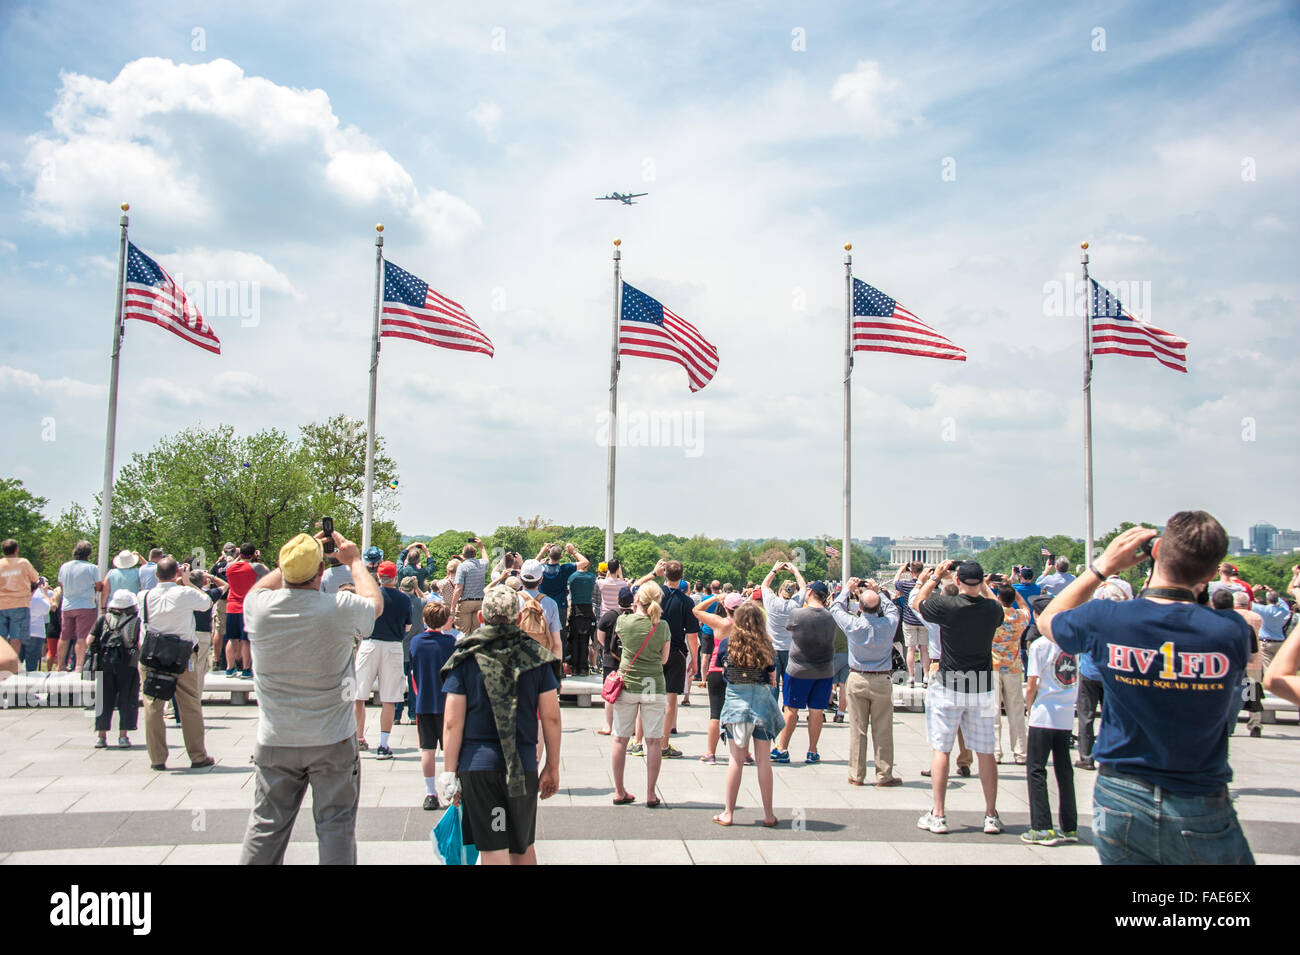 People watching planes fly over American flags. Stock Photo